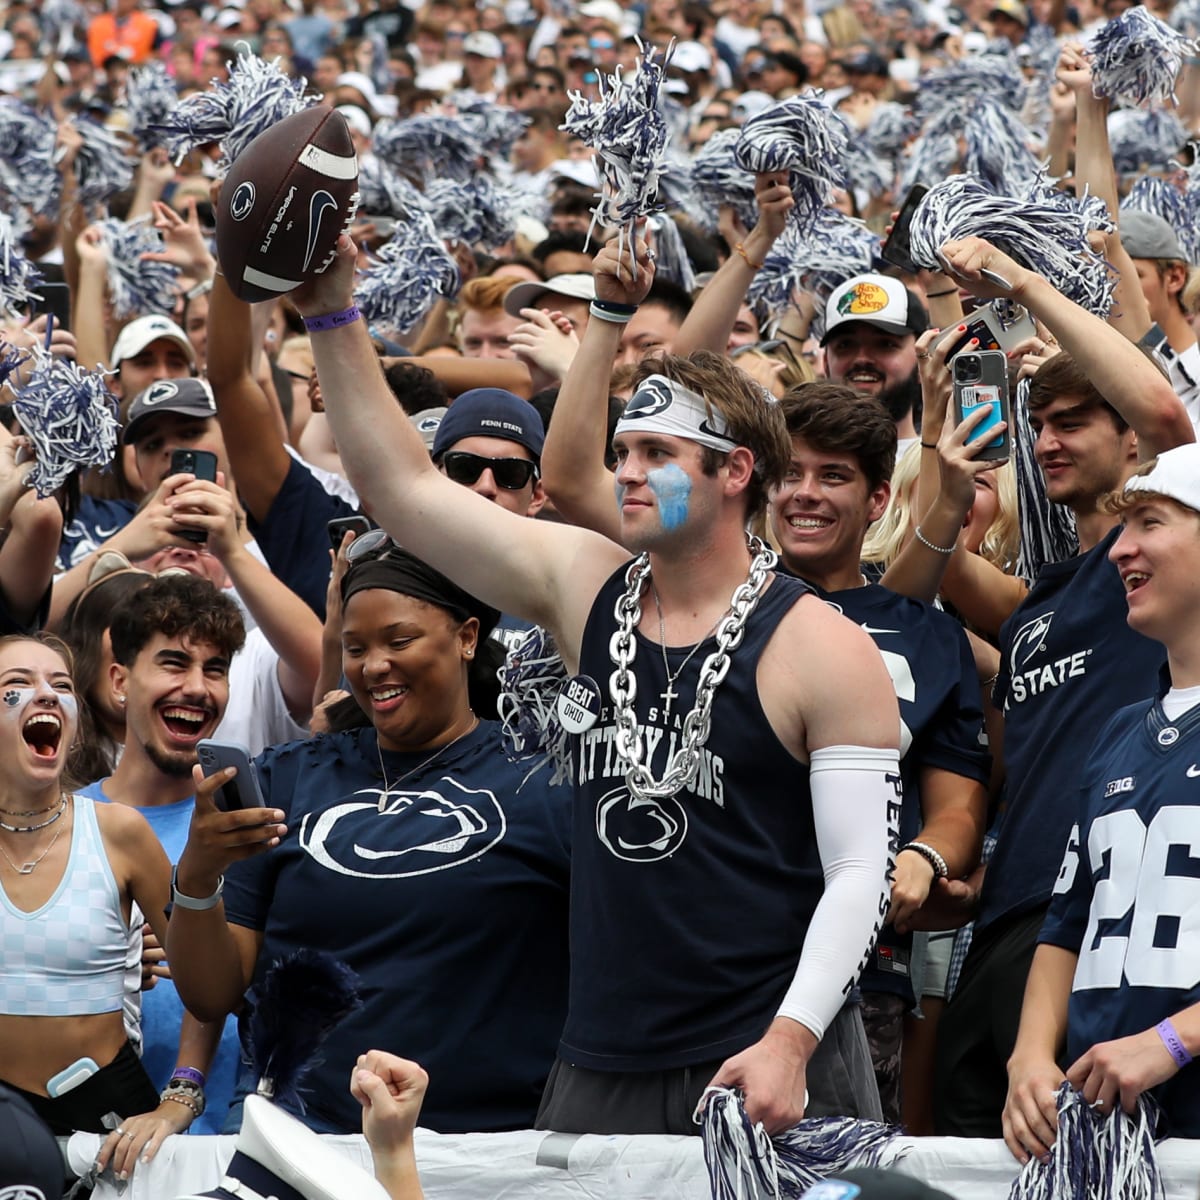 Penn State Football: The Penn State Nittany Lions Defeat Ohio 46